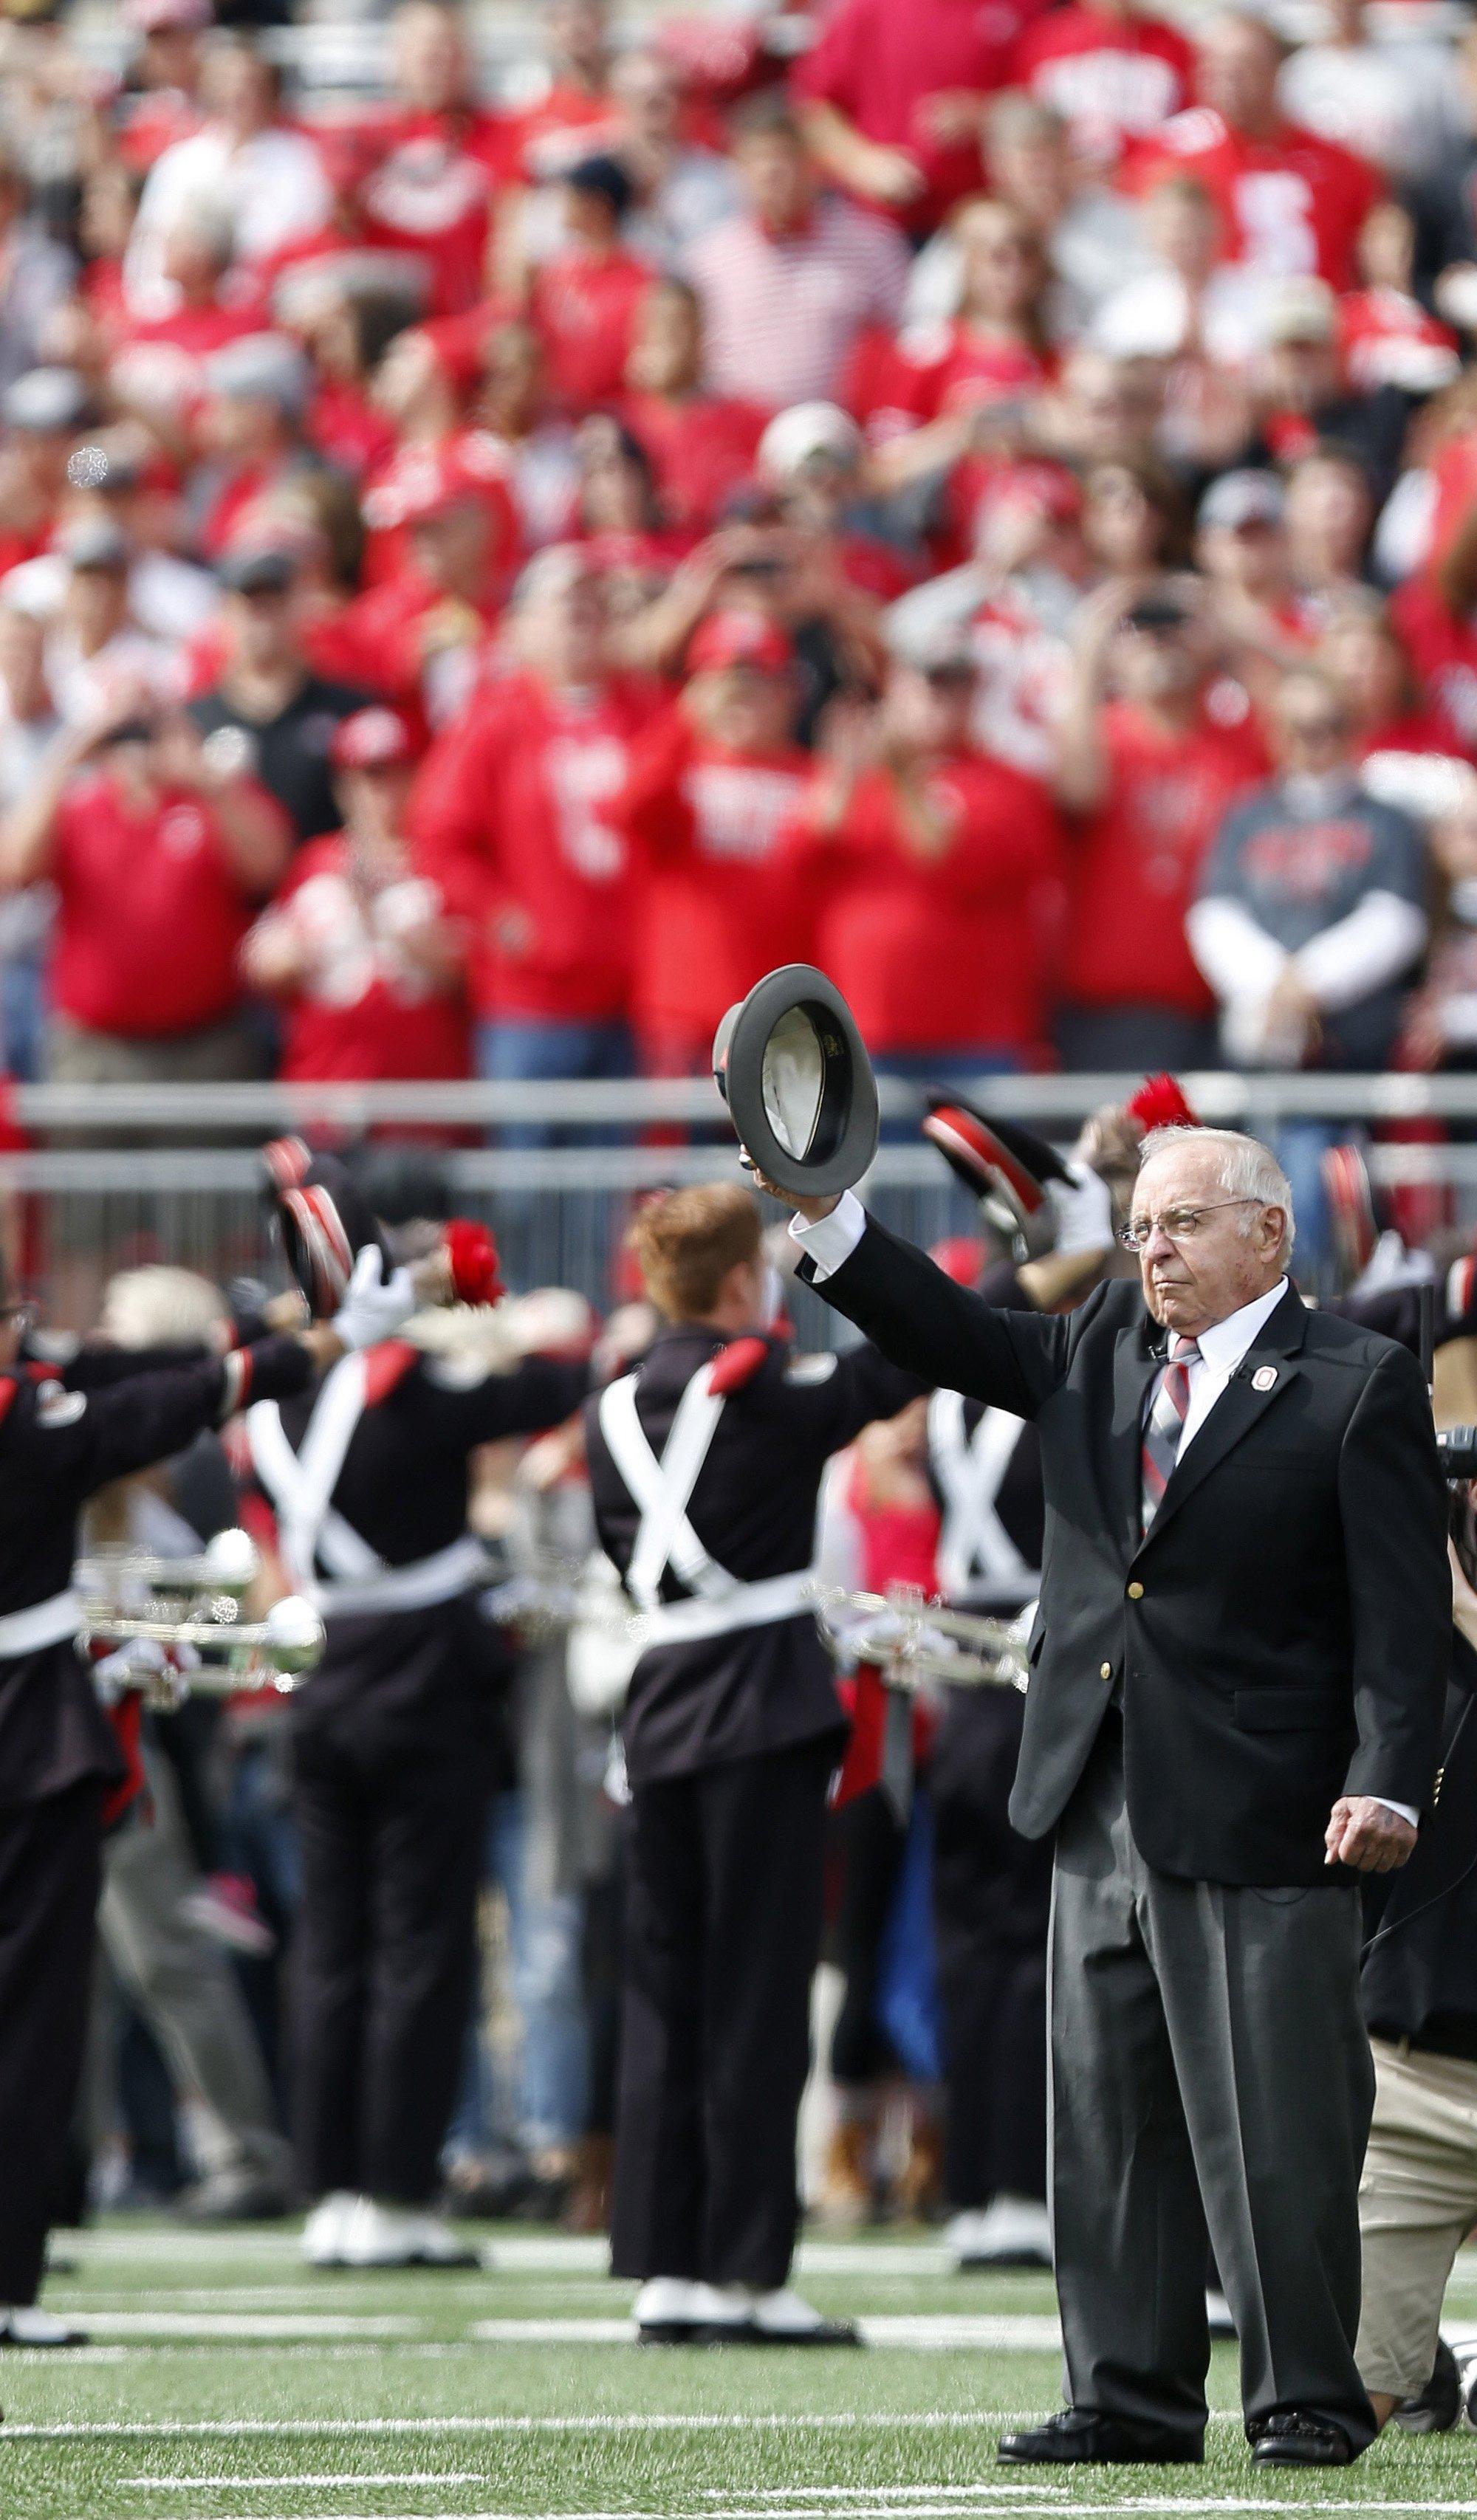 Former head football coach Earle Bruce dots the "i" in Script Ohio before the NCAA football game between the Ohio State Buckeyes and the Rutgers Scarlet Knights at Ohio Stadium on Saturday, October 1, 2016.